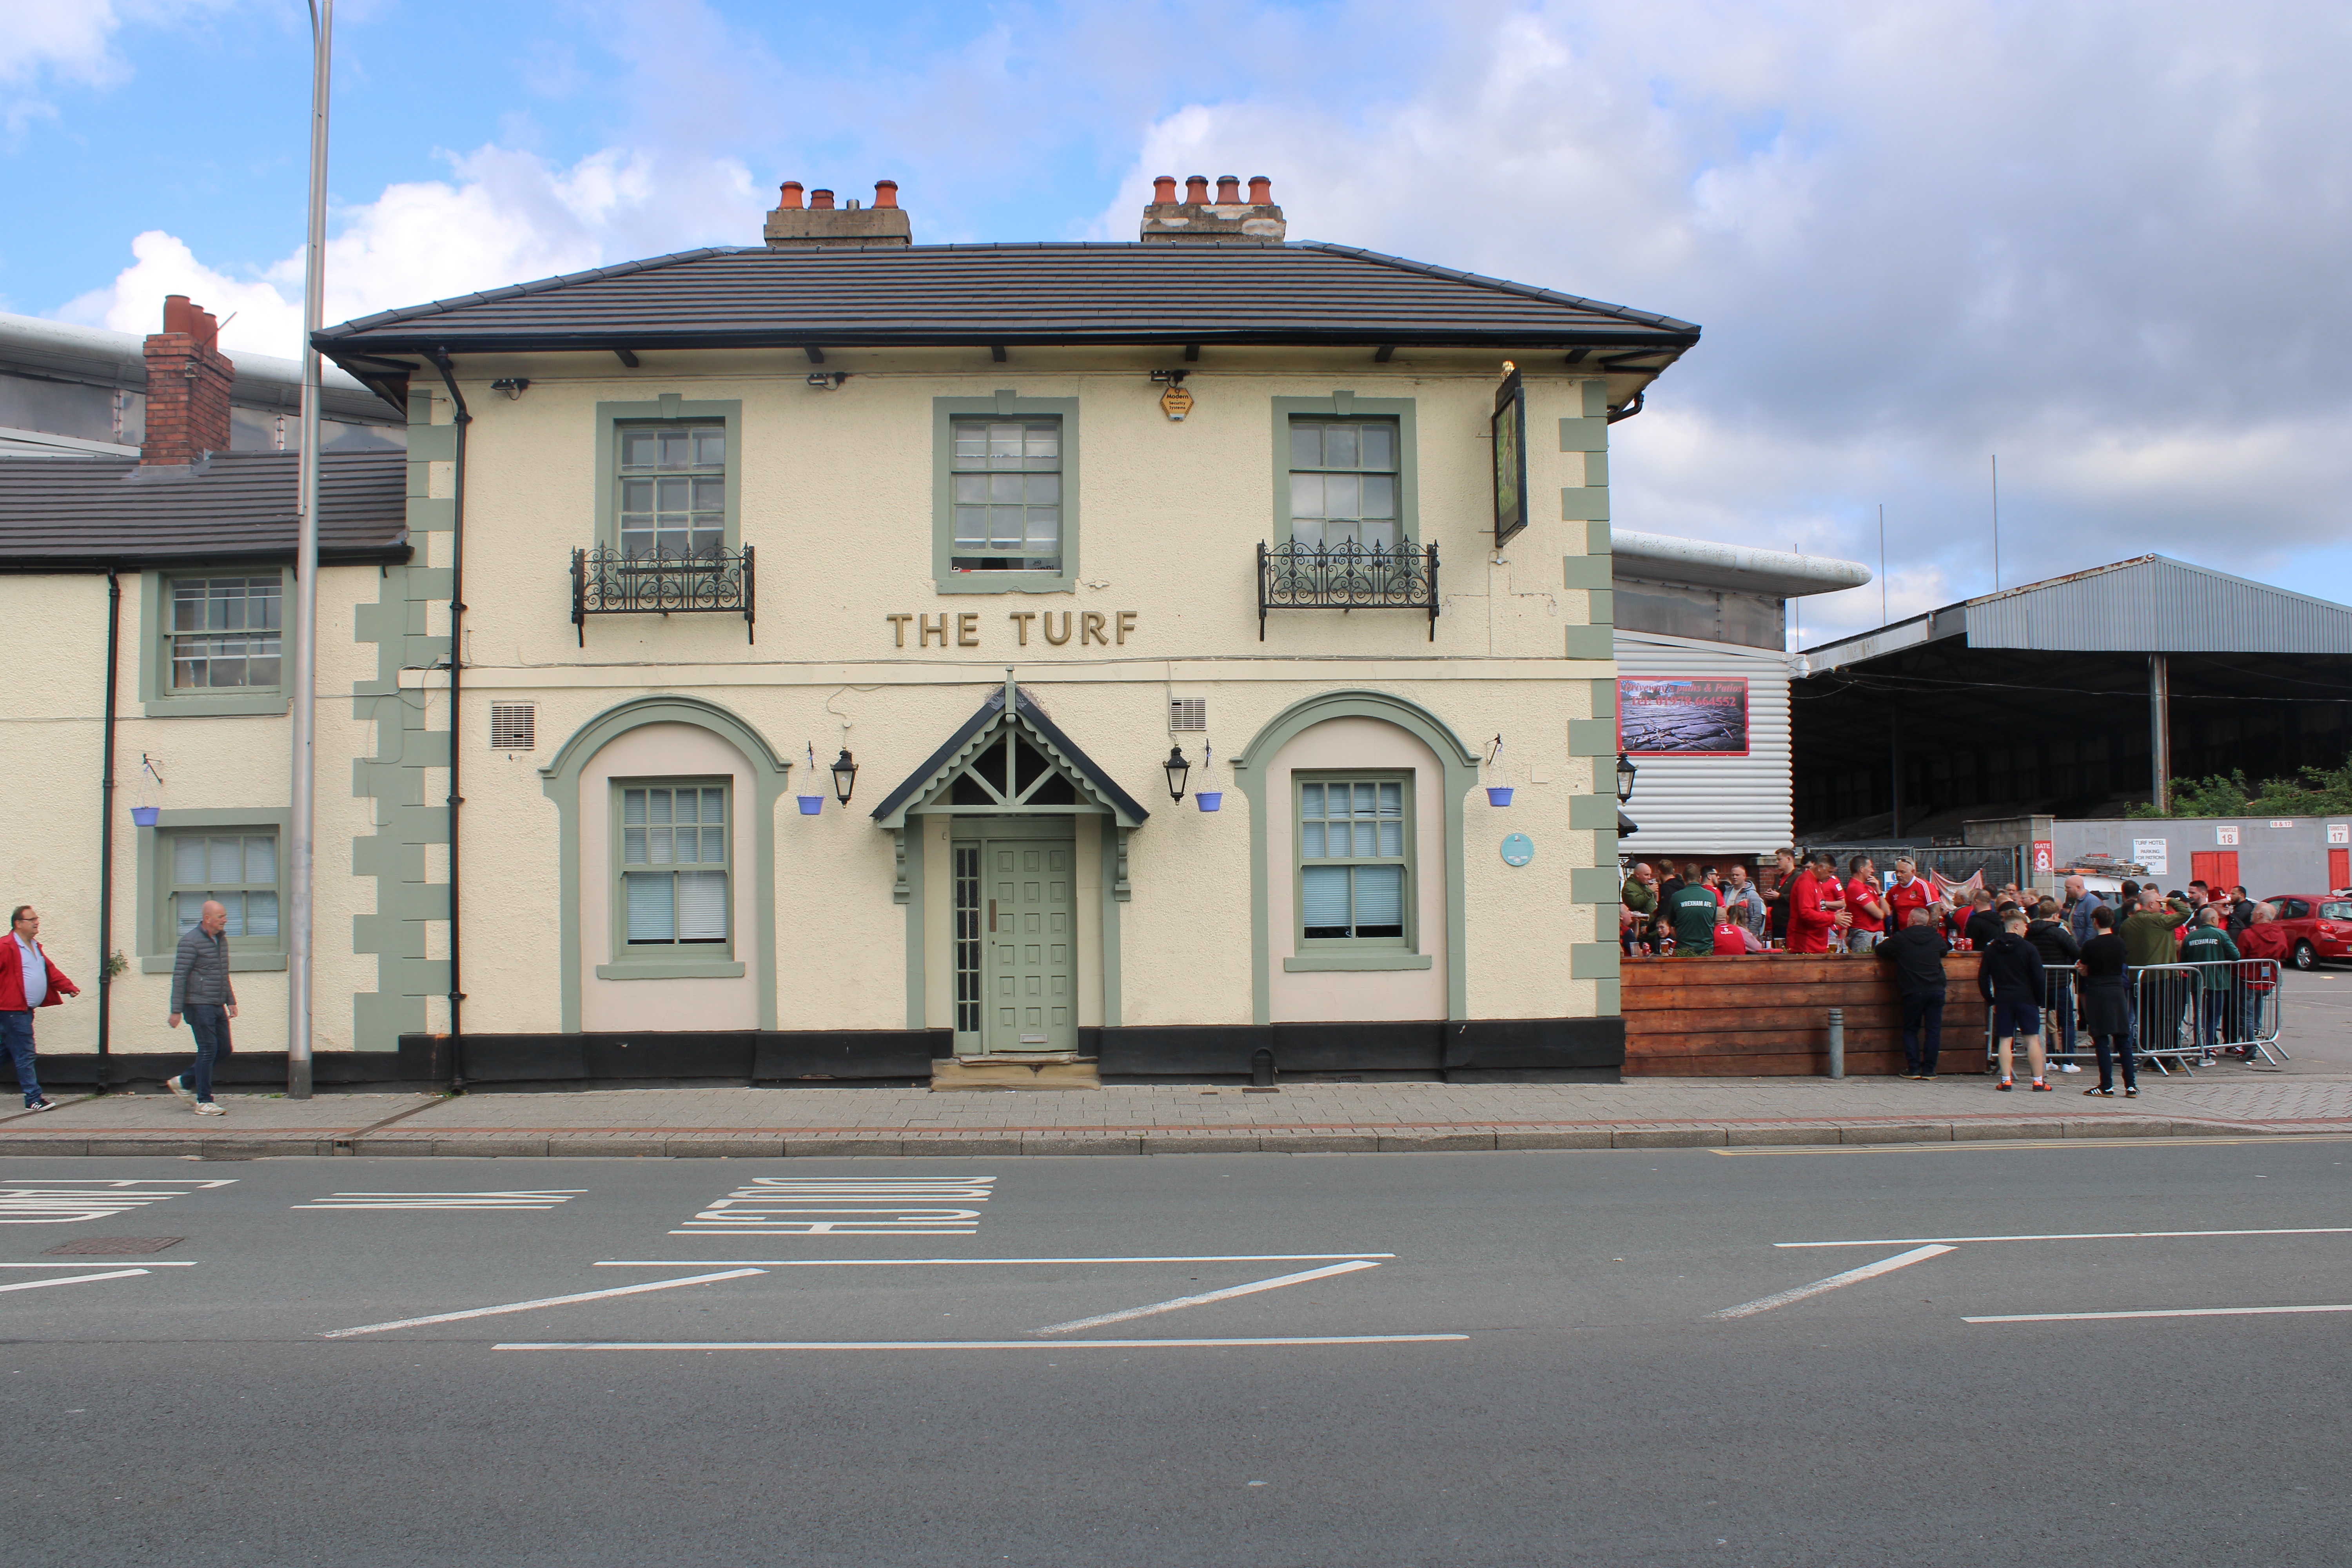 The Turf, a pub in Wrexham on the street outside the stadium.